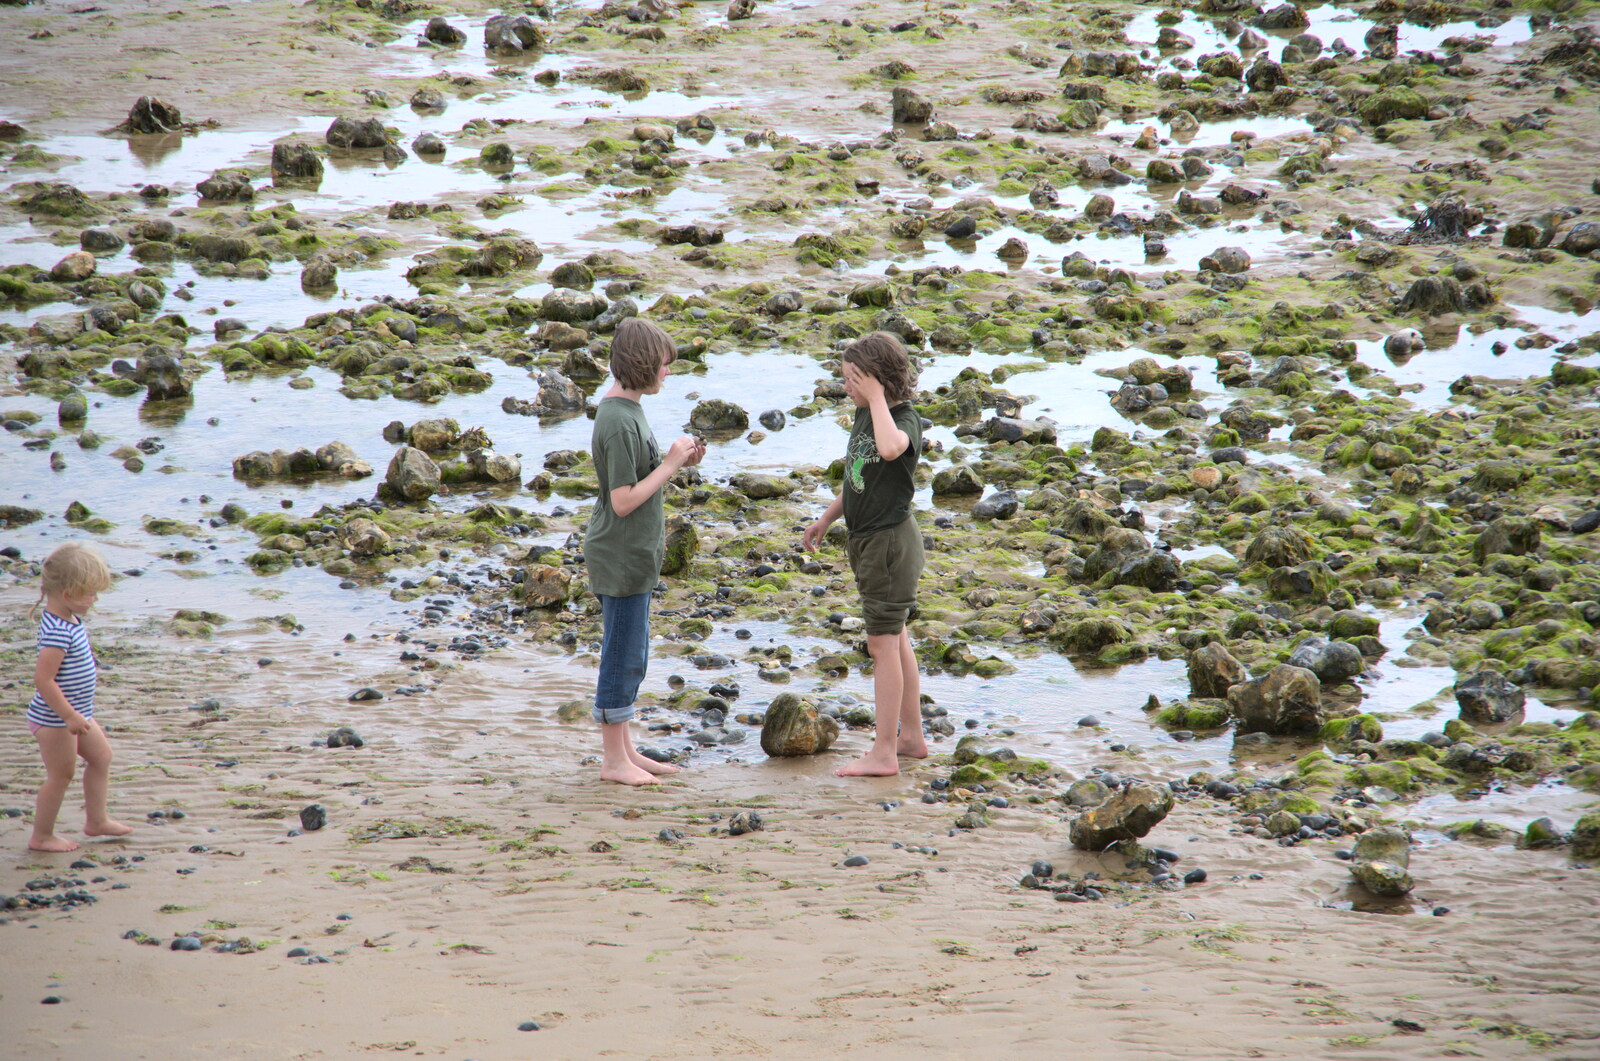 Fred and Lydia amongst the rock pools from Camping on the Coast, East Runton, North Norfolk - 25th July 2020